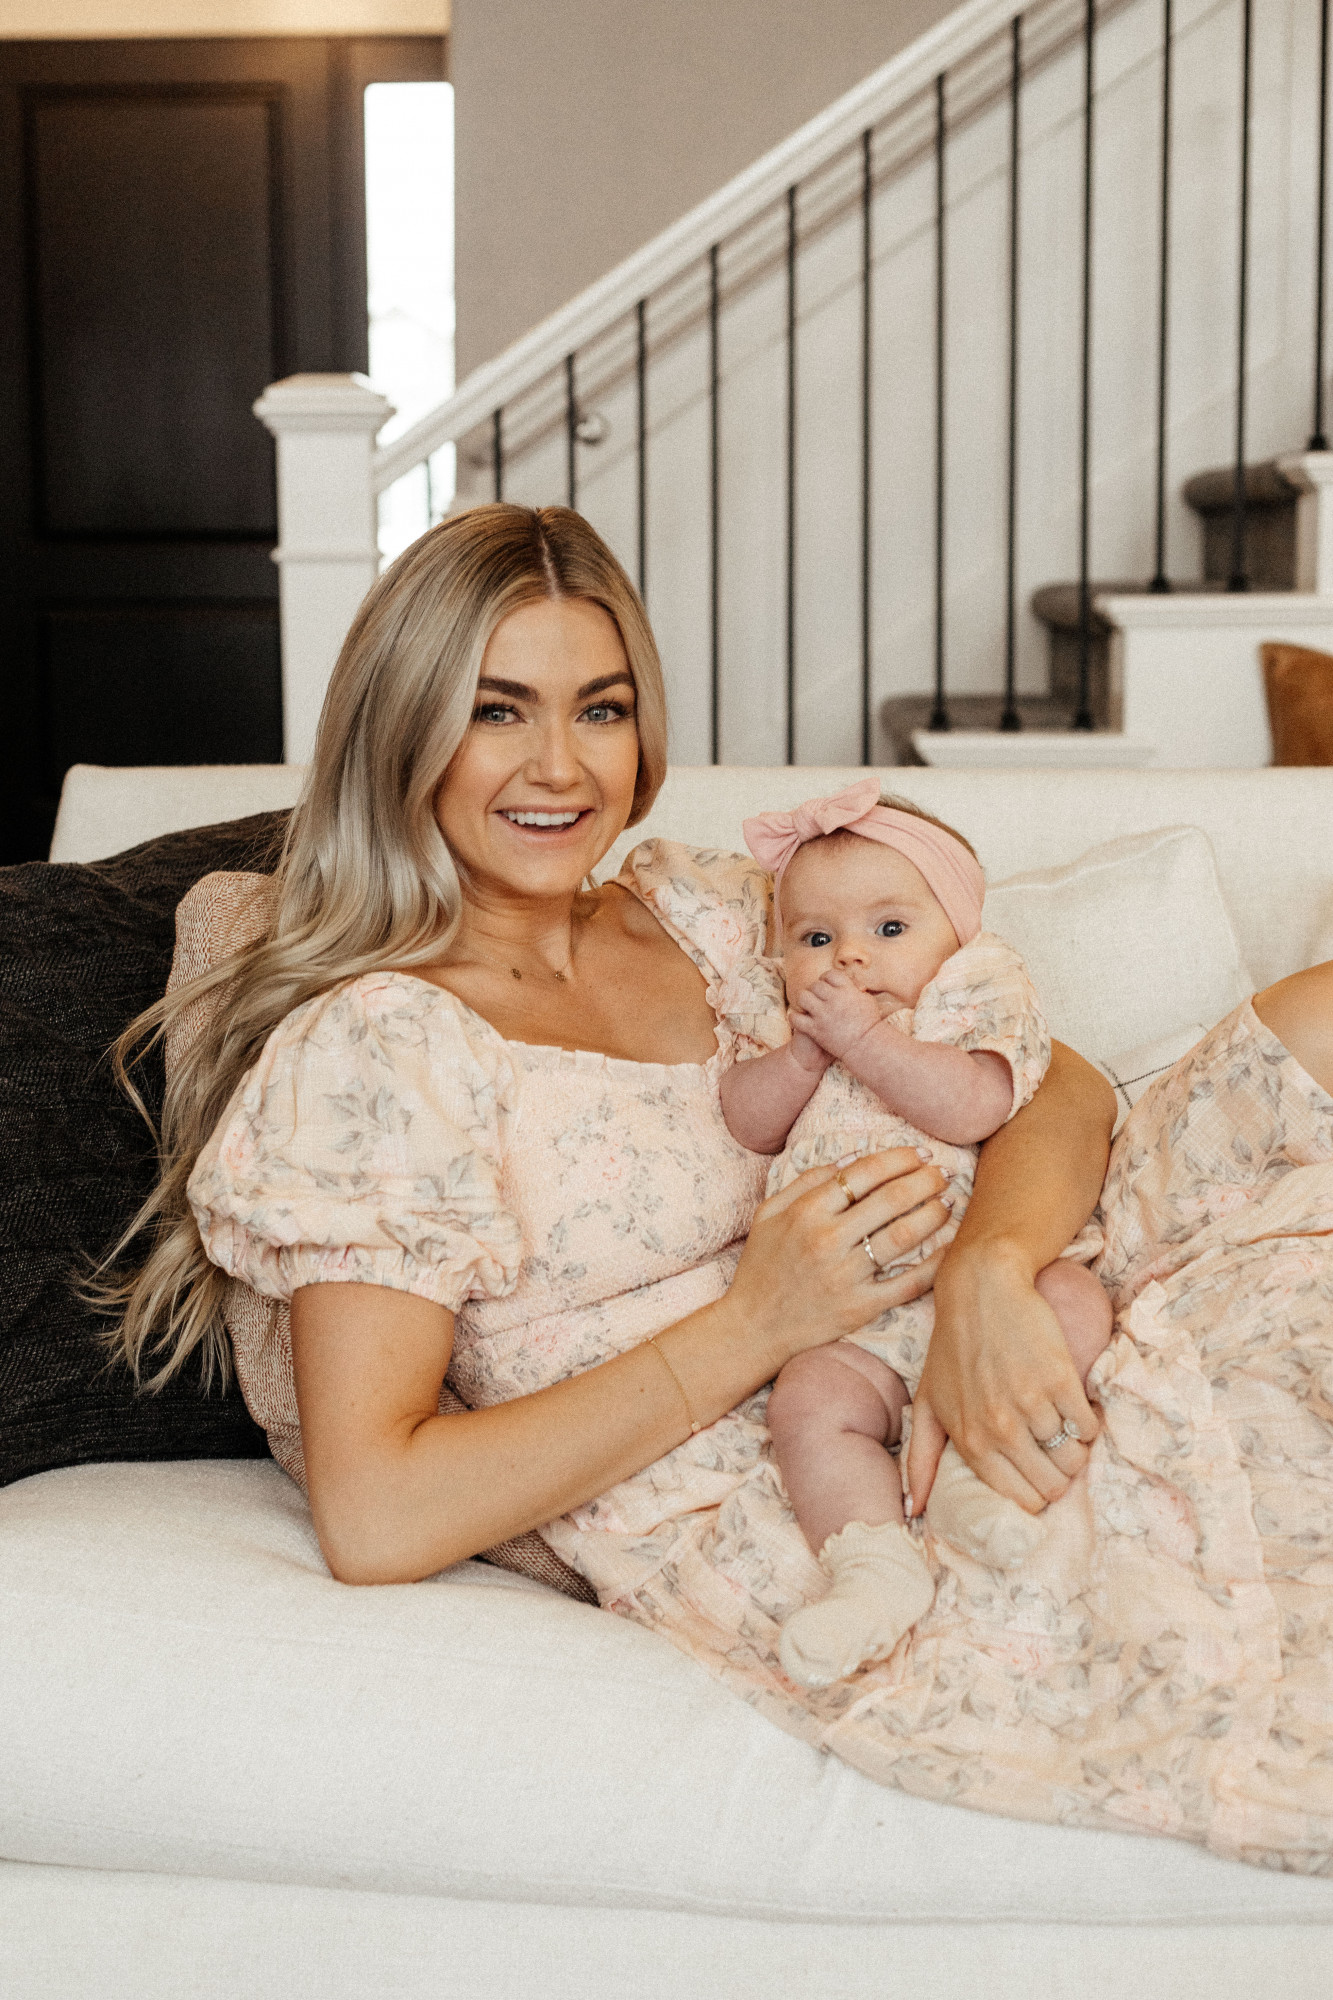 My Favorite Mommy & Me Outfits - Lindsay Arnold